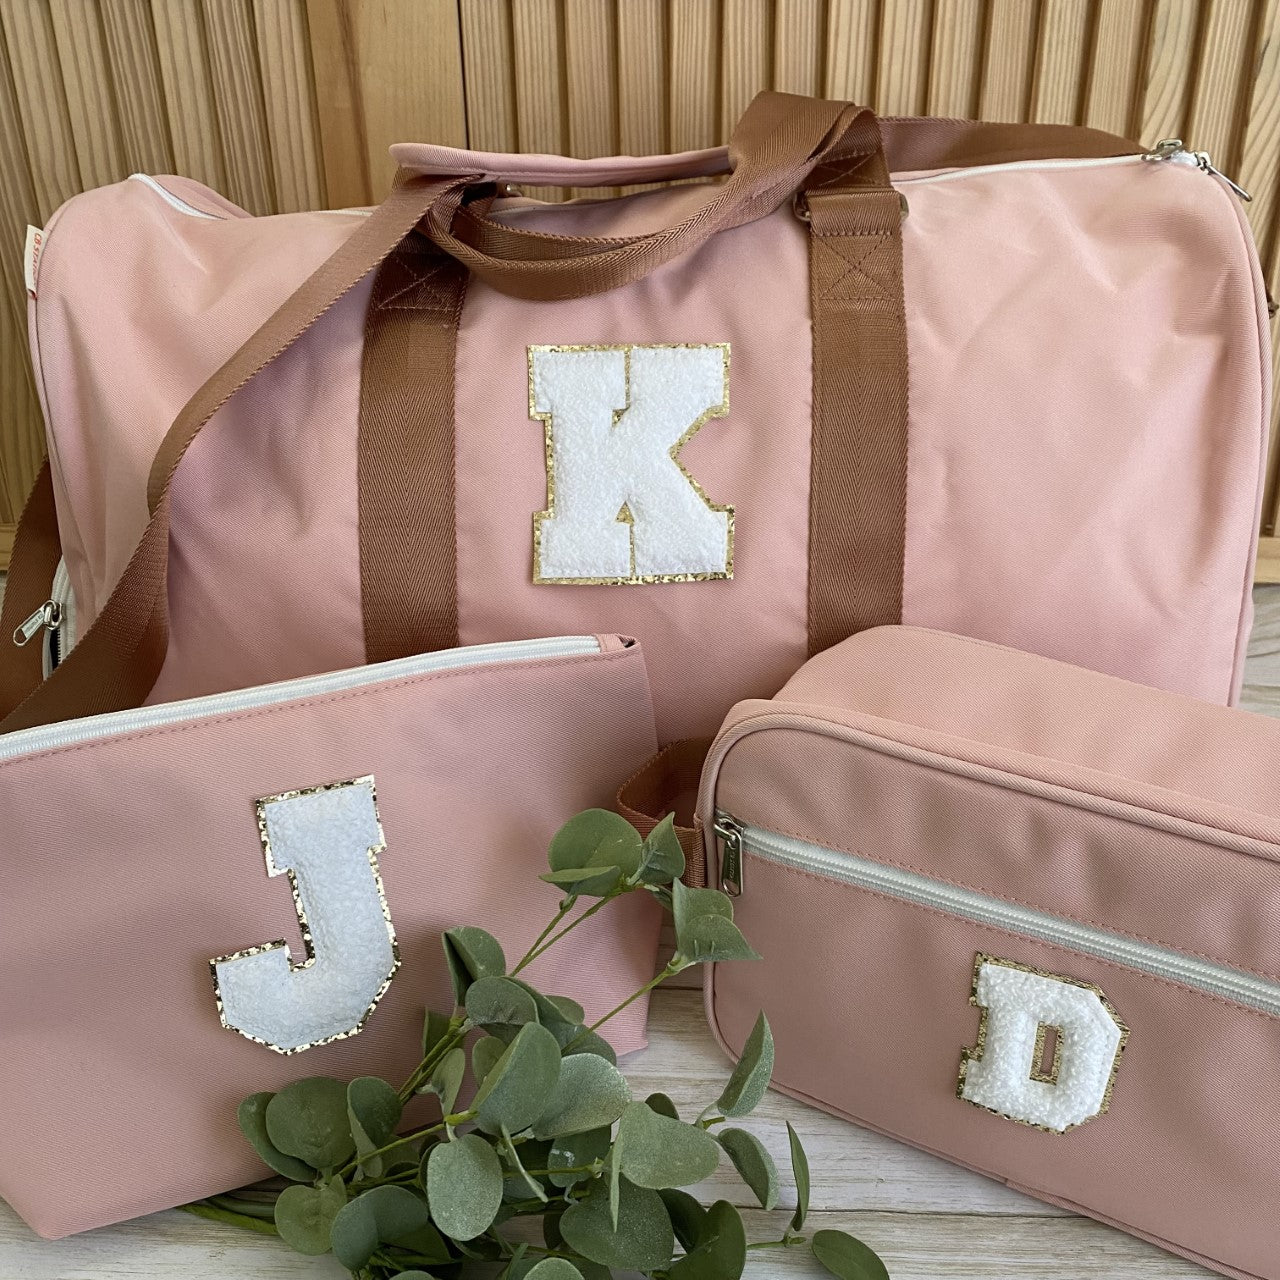 All You Need Baby Pink Varsity Tote